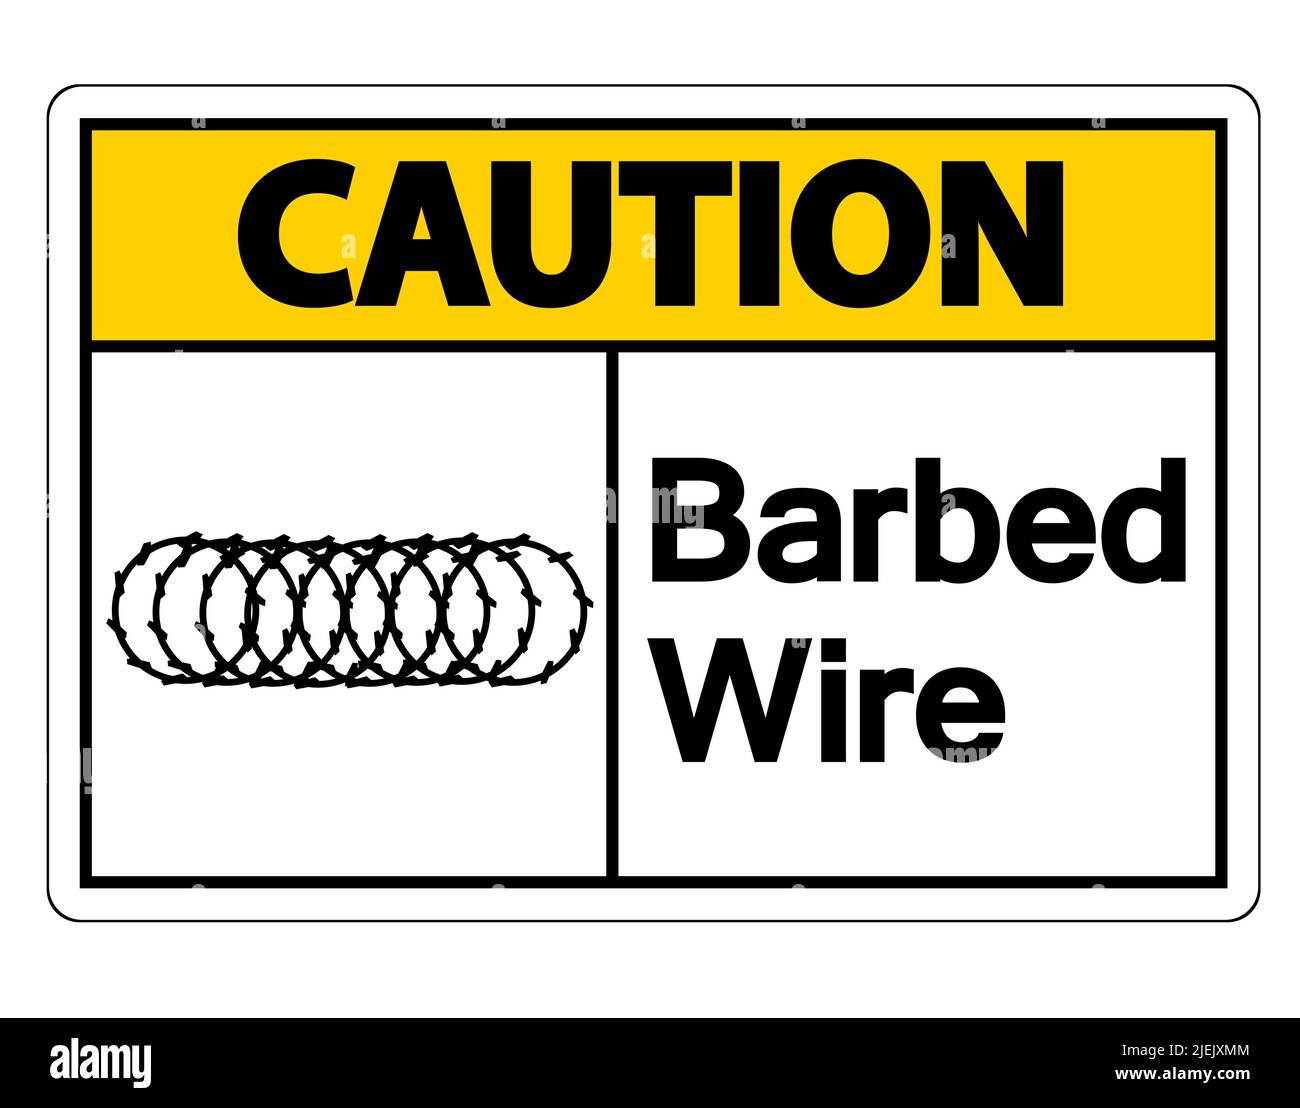 Caution Barbed Wire Symbol Sign On White Background,Vector Illustration Stock Vector